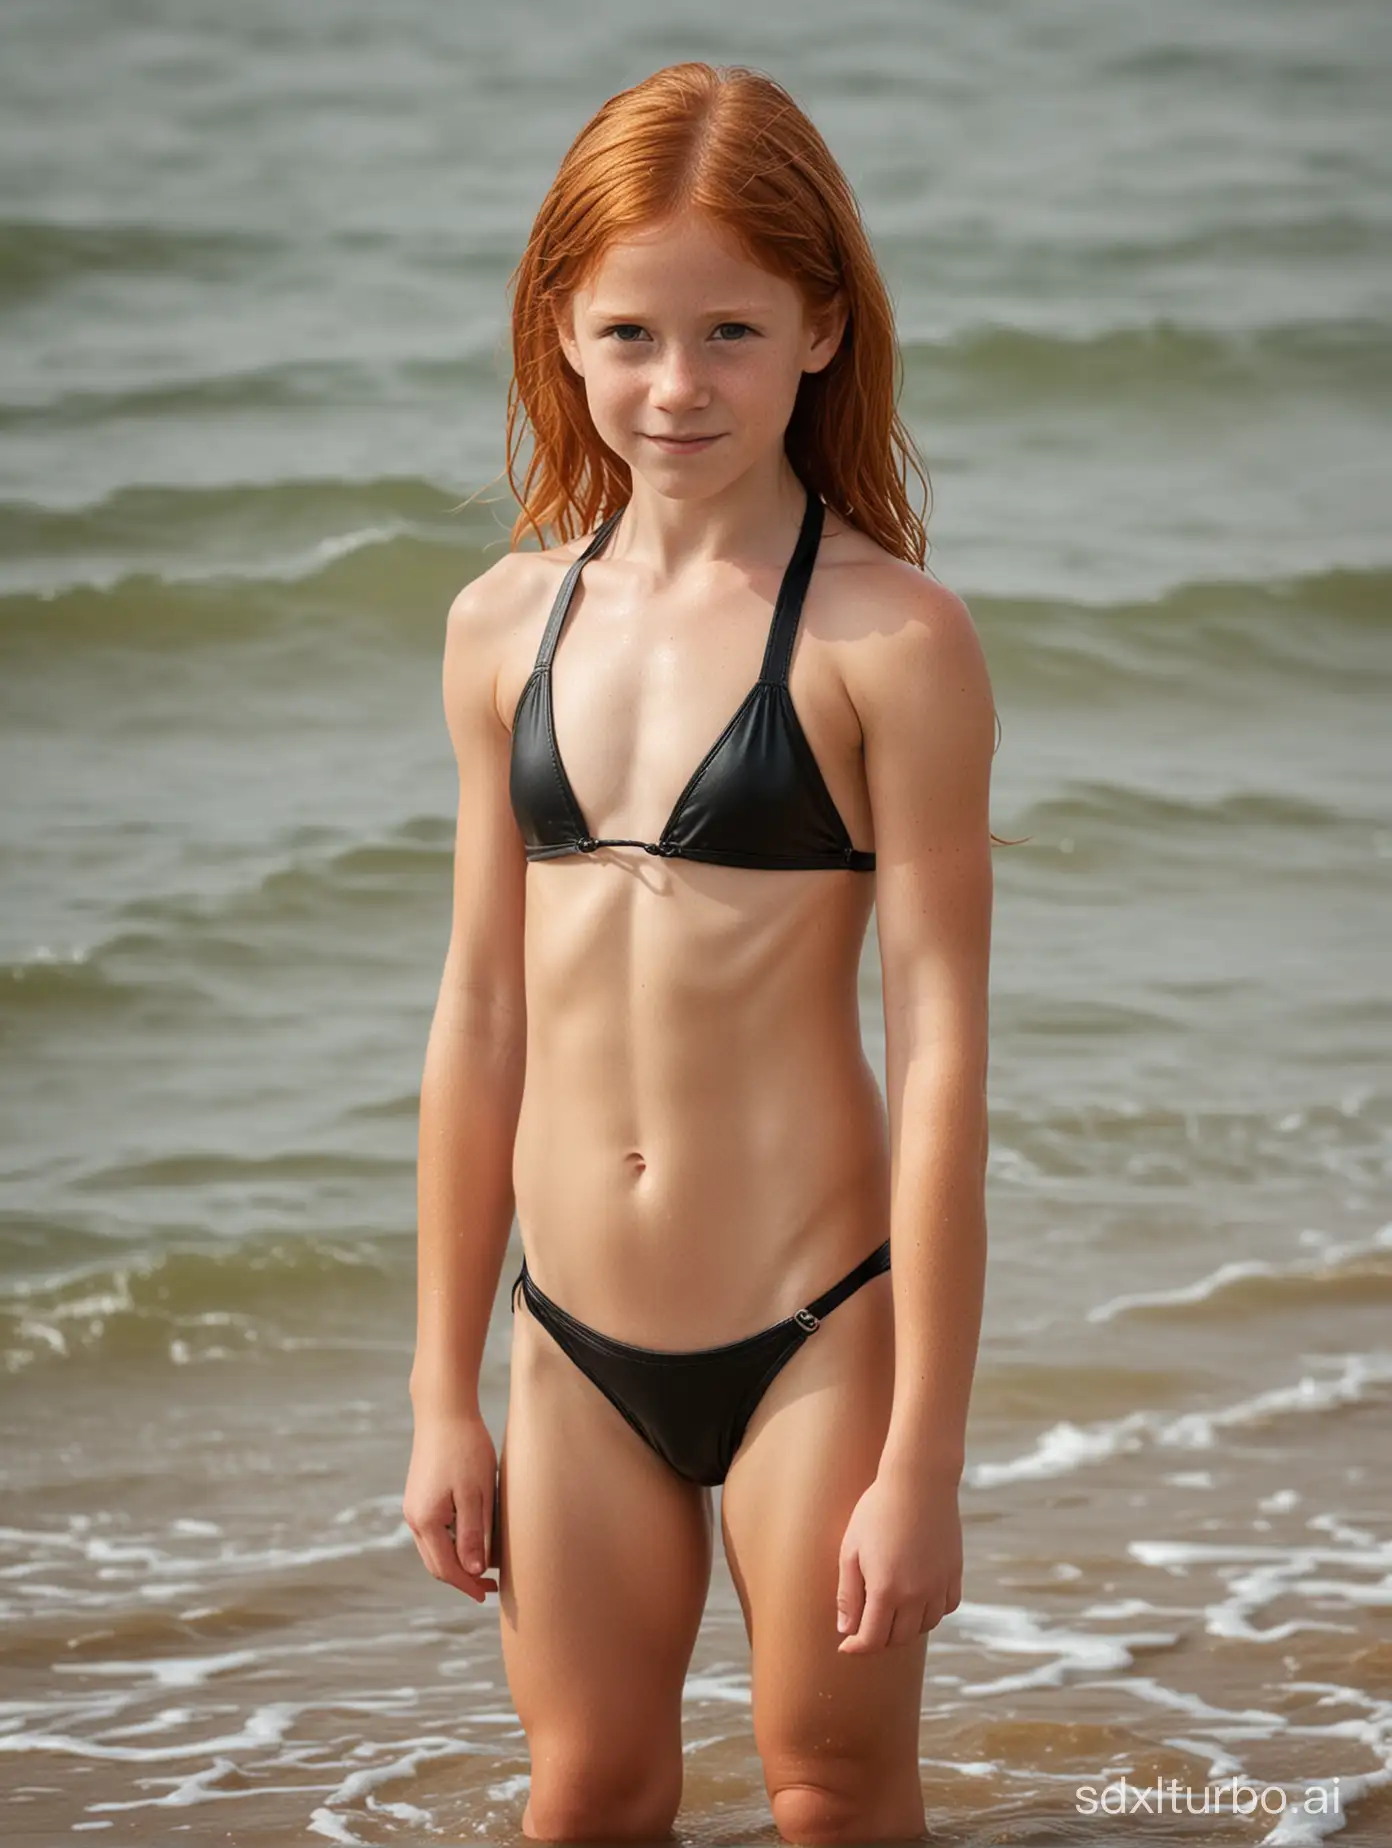 Muscular-GingerHaired-Girl-in-Leather-Bathing-Suit-at-Odessa-Beach